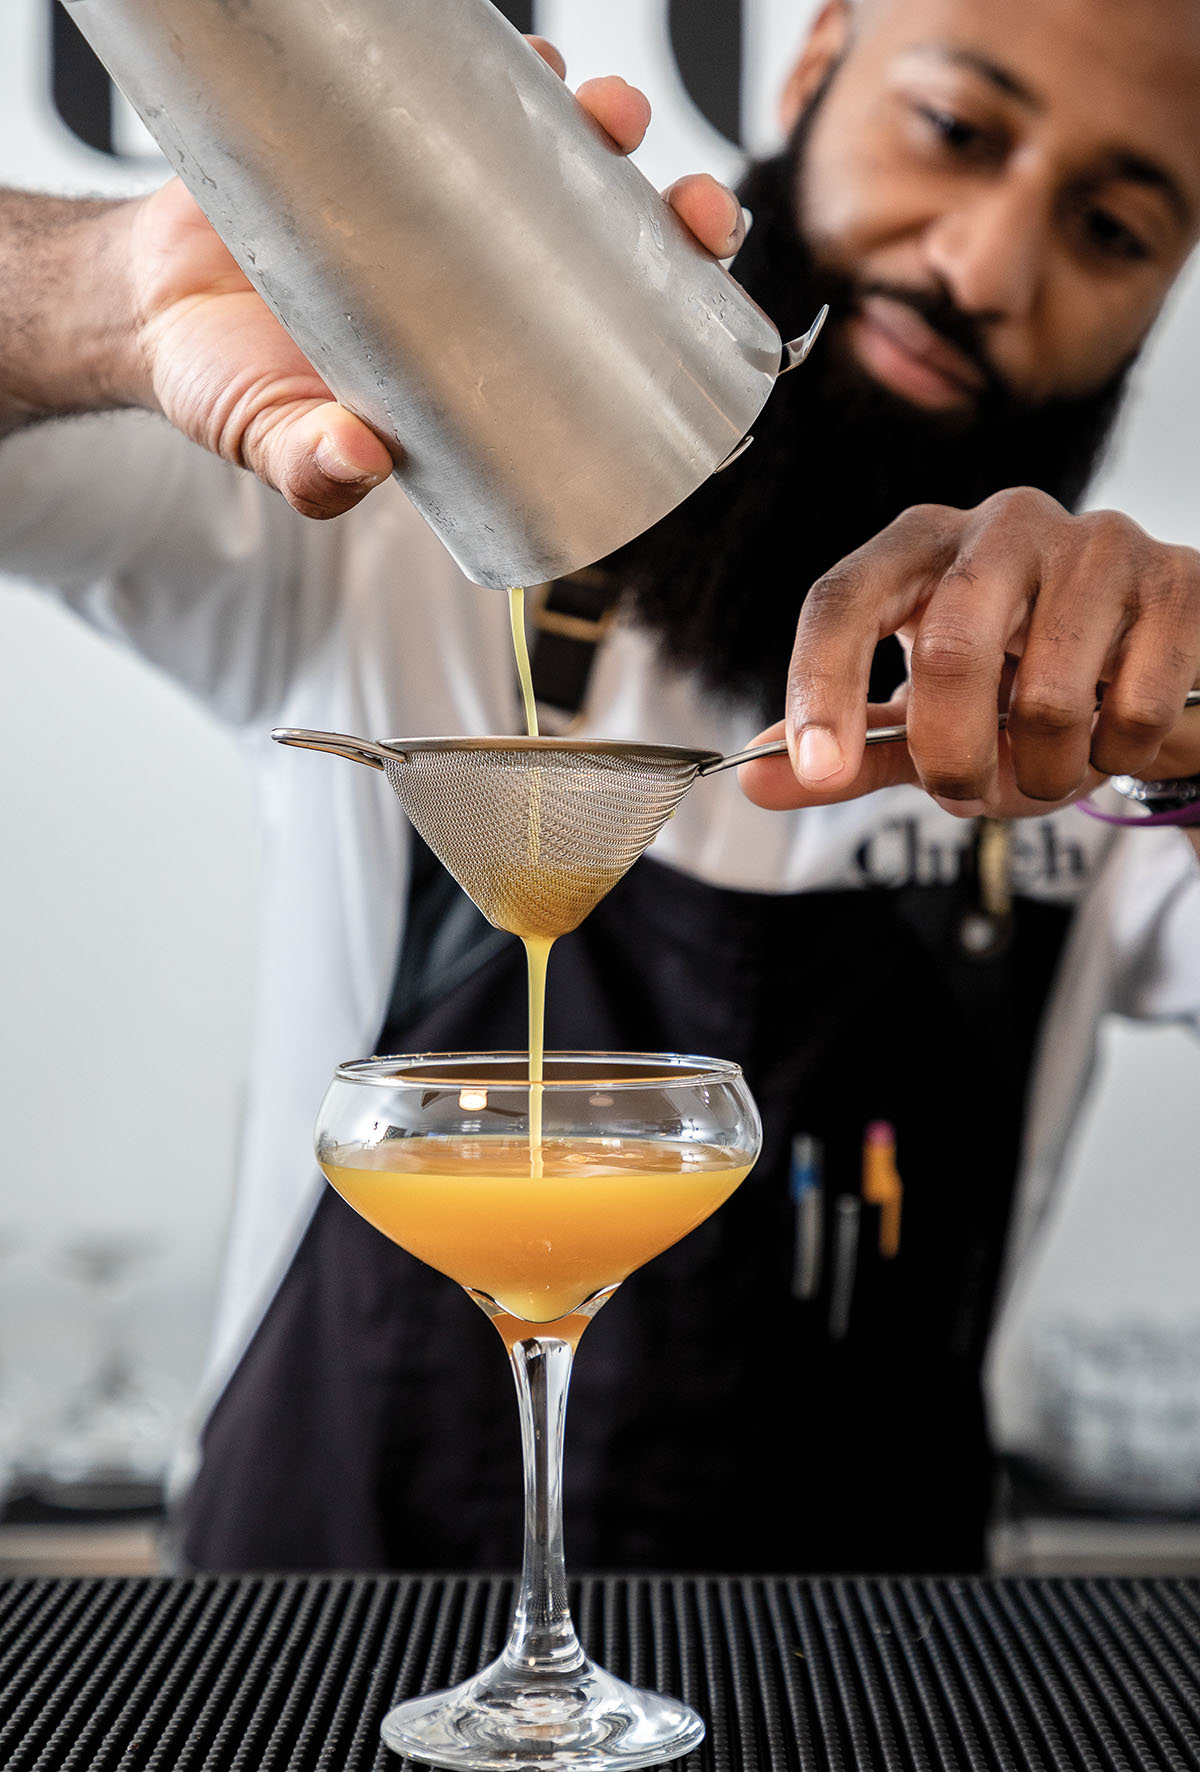 A man pours an orange-colored cocktail from a silver shaker